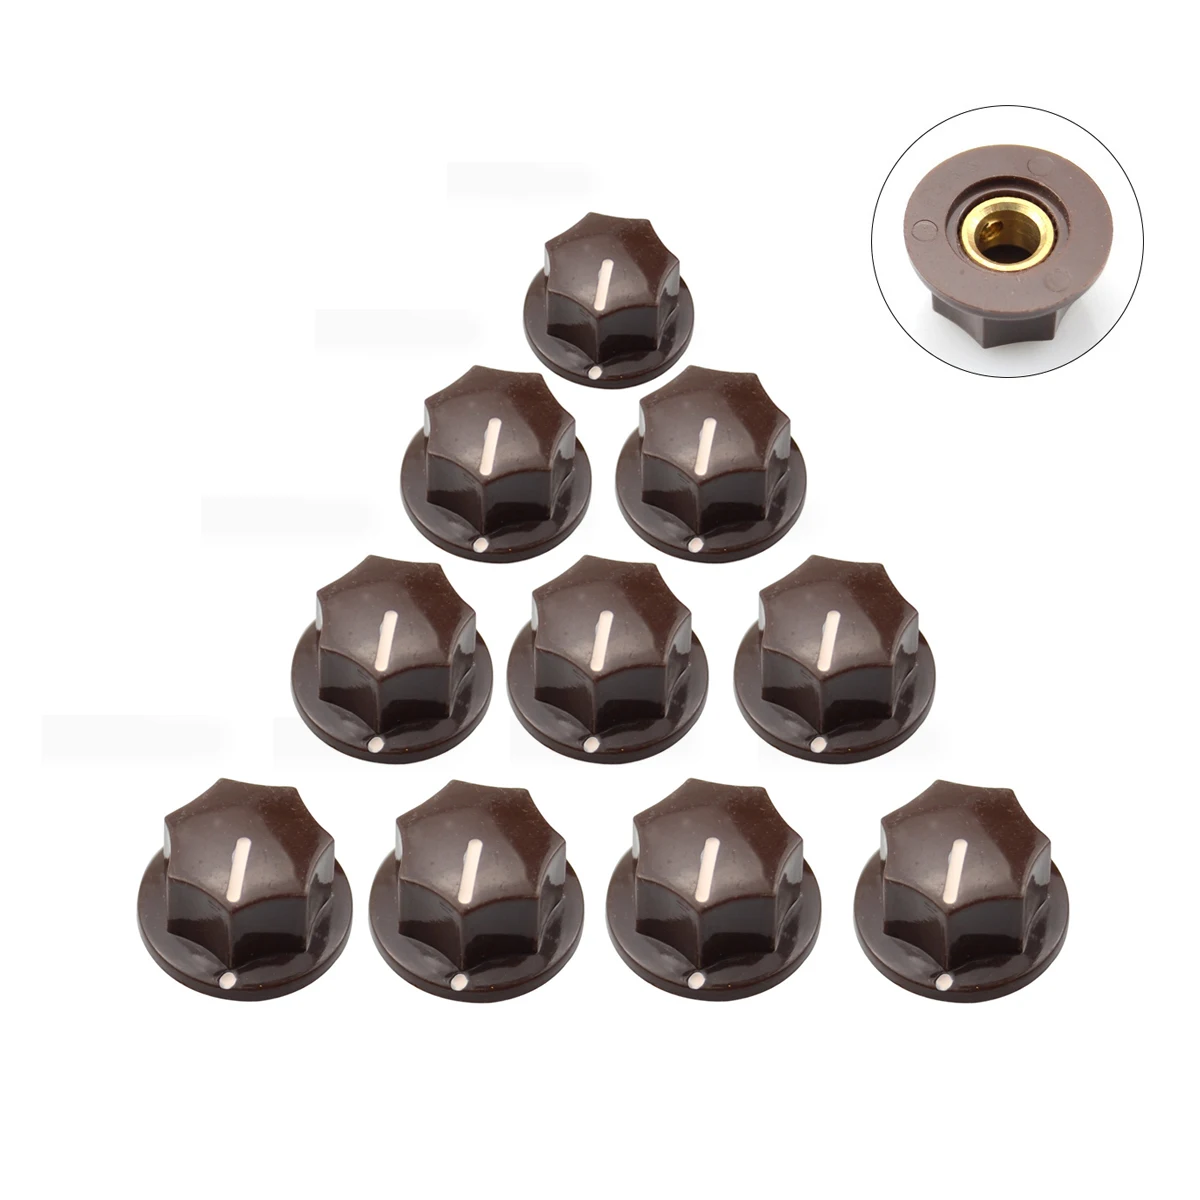 10 pcs x Small Size Guitar Knob MXR Style Skirted AMP Knob Effects Pedal Knobs Brass Insert Guitar Accessories